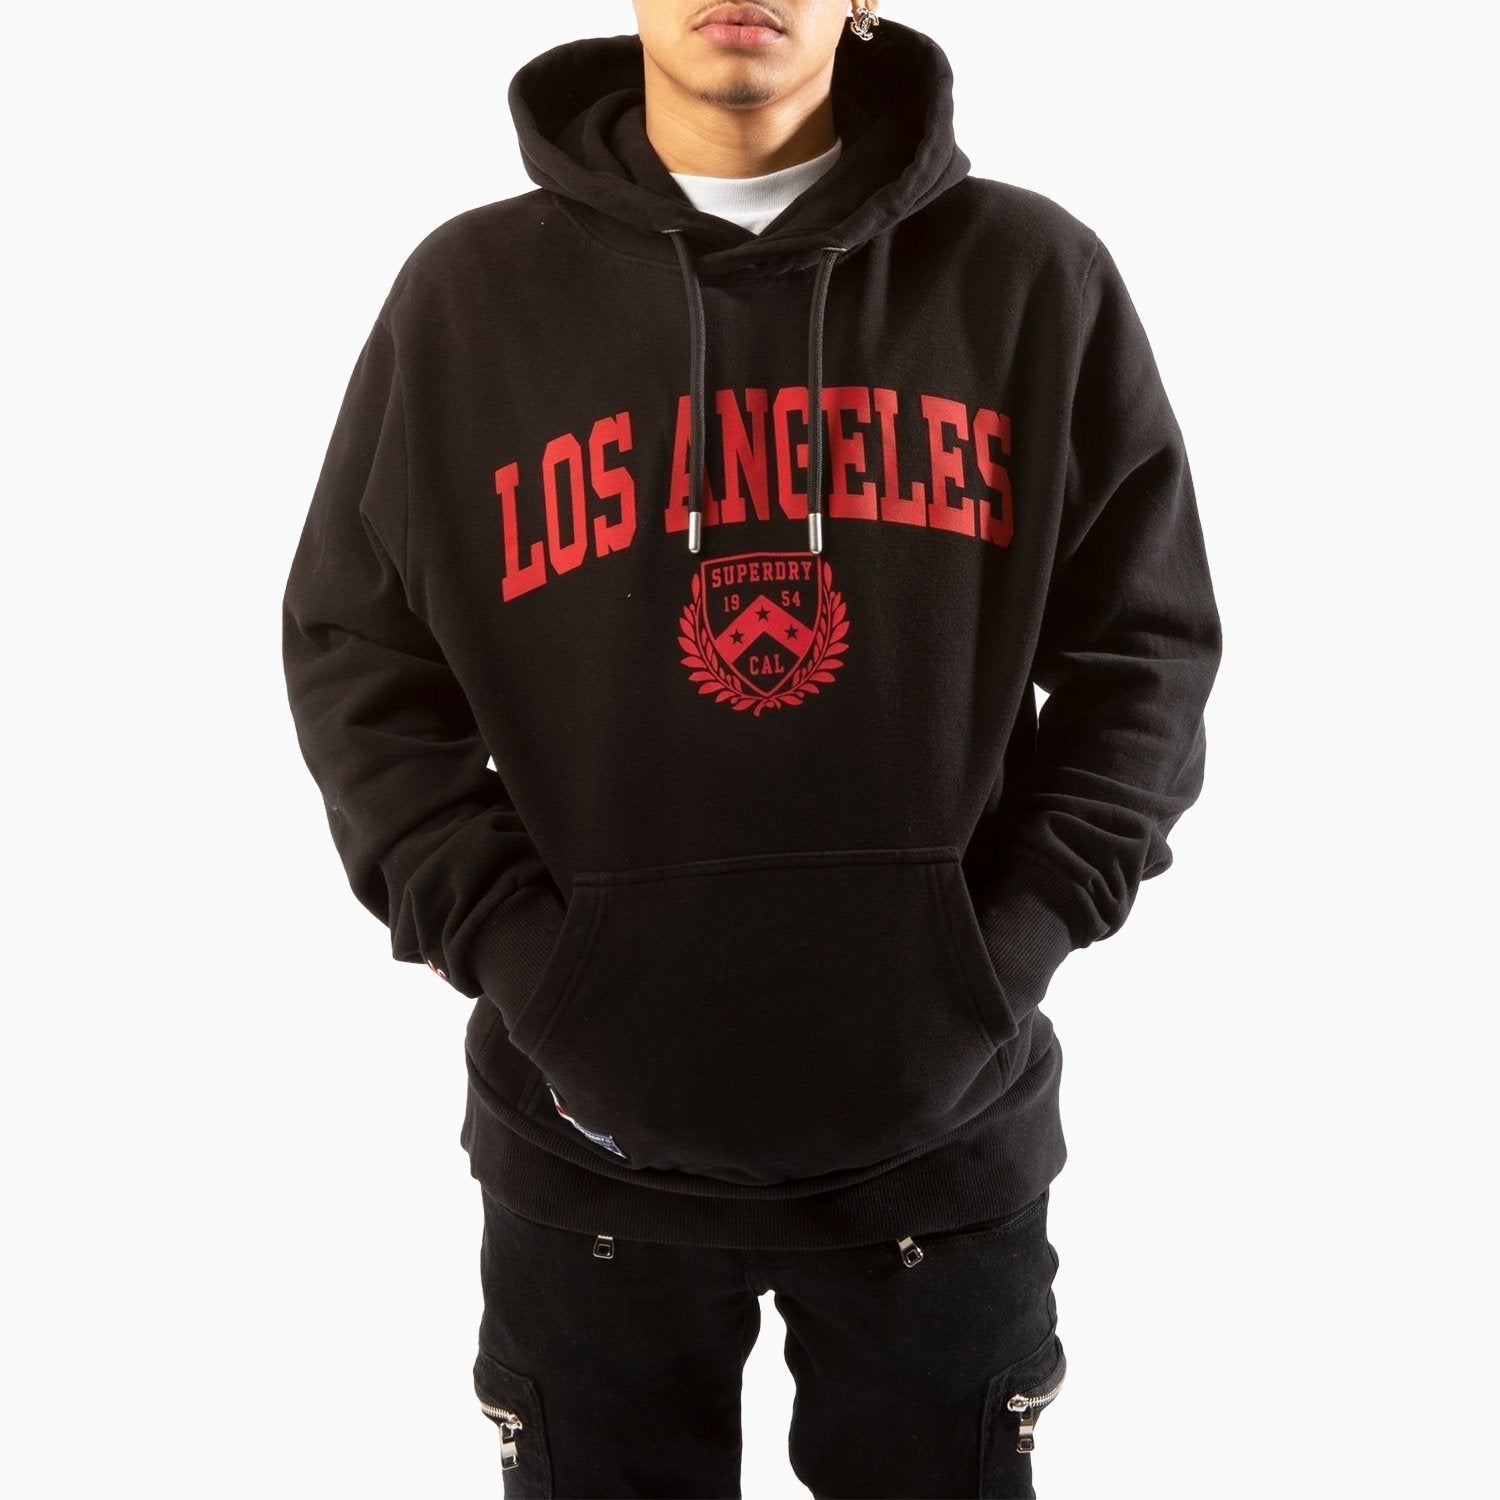 Superdry Men's City College Hoodie - Color: Black - Tops and Bottoms USA -